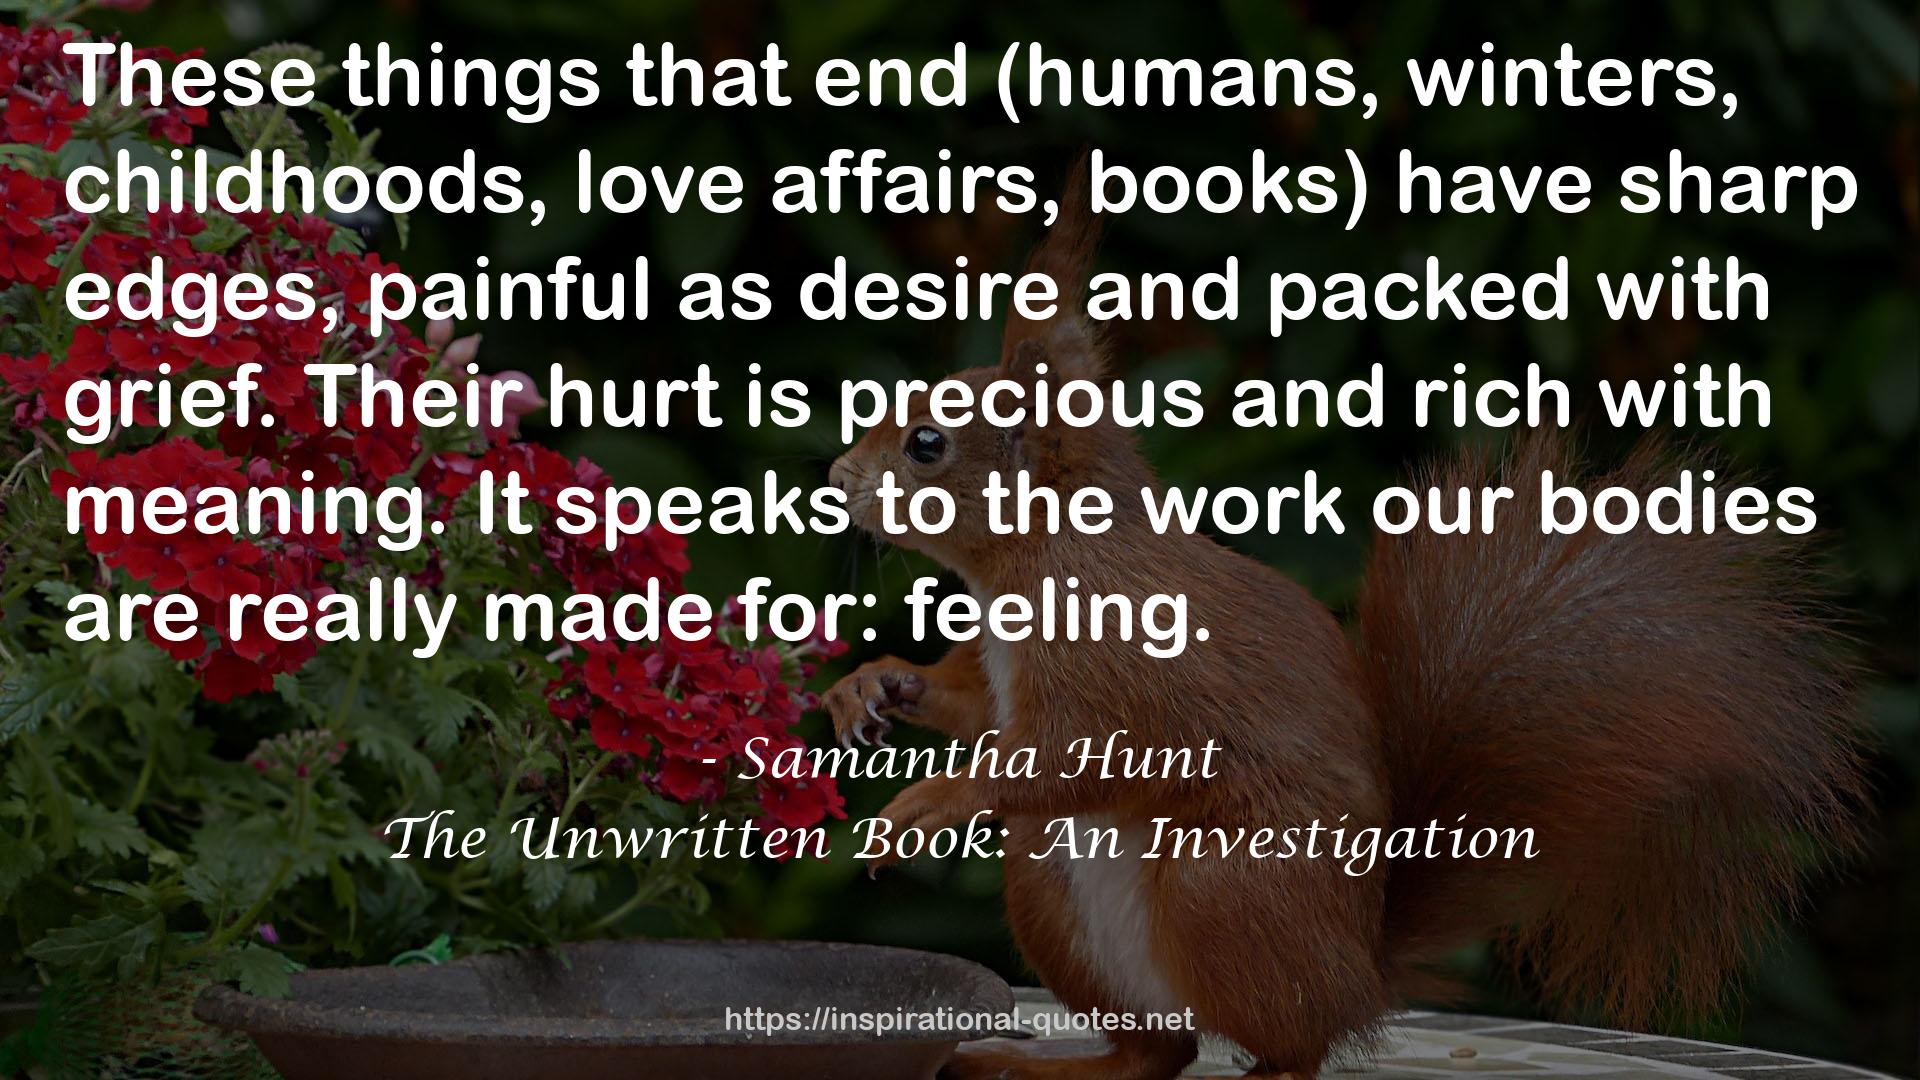 The Unwritten Book: An Investigation QUOTES